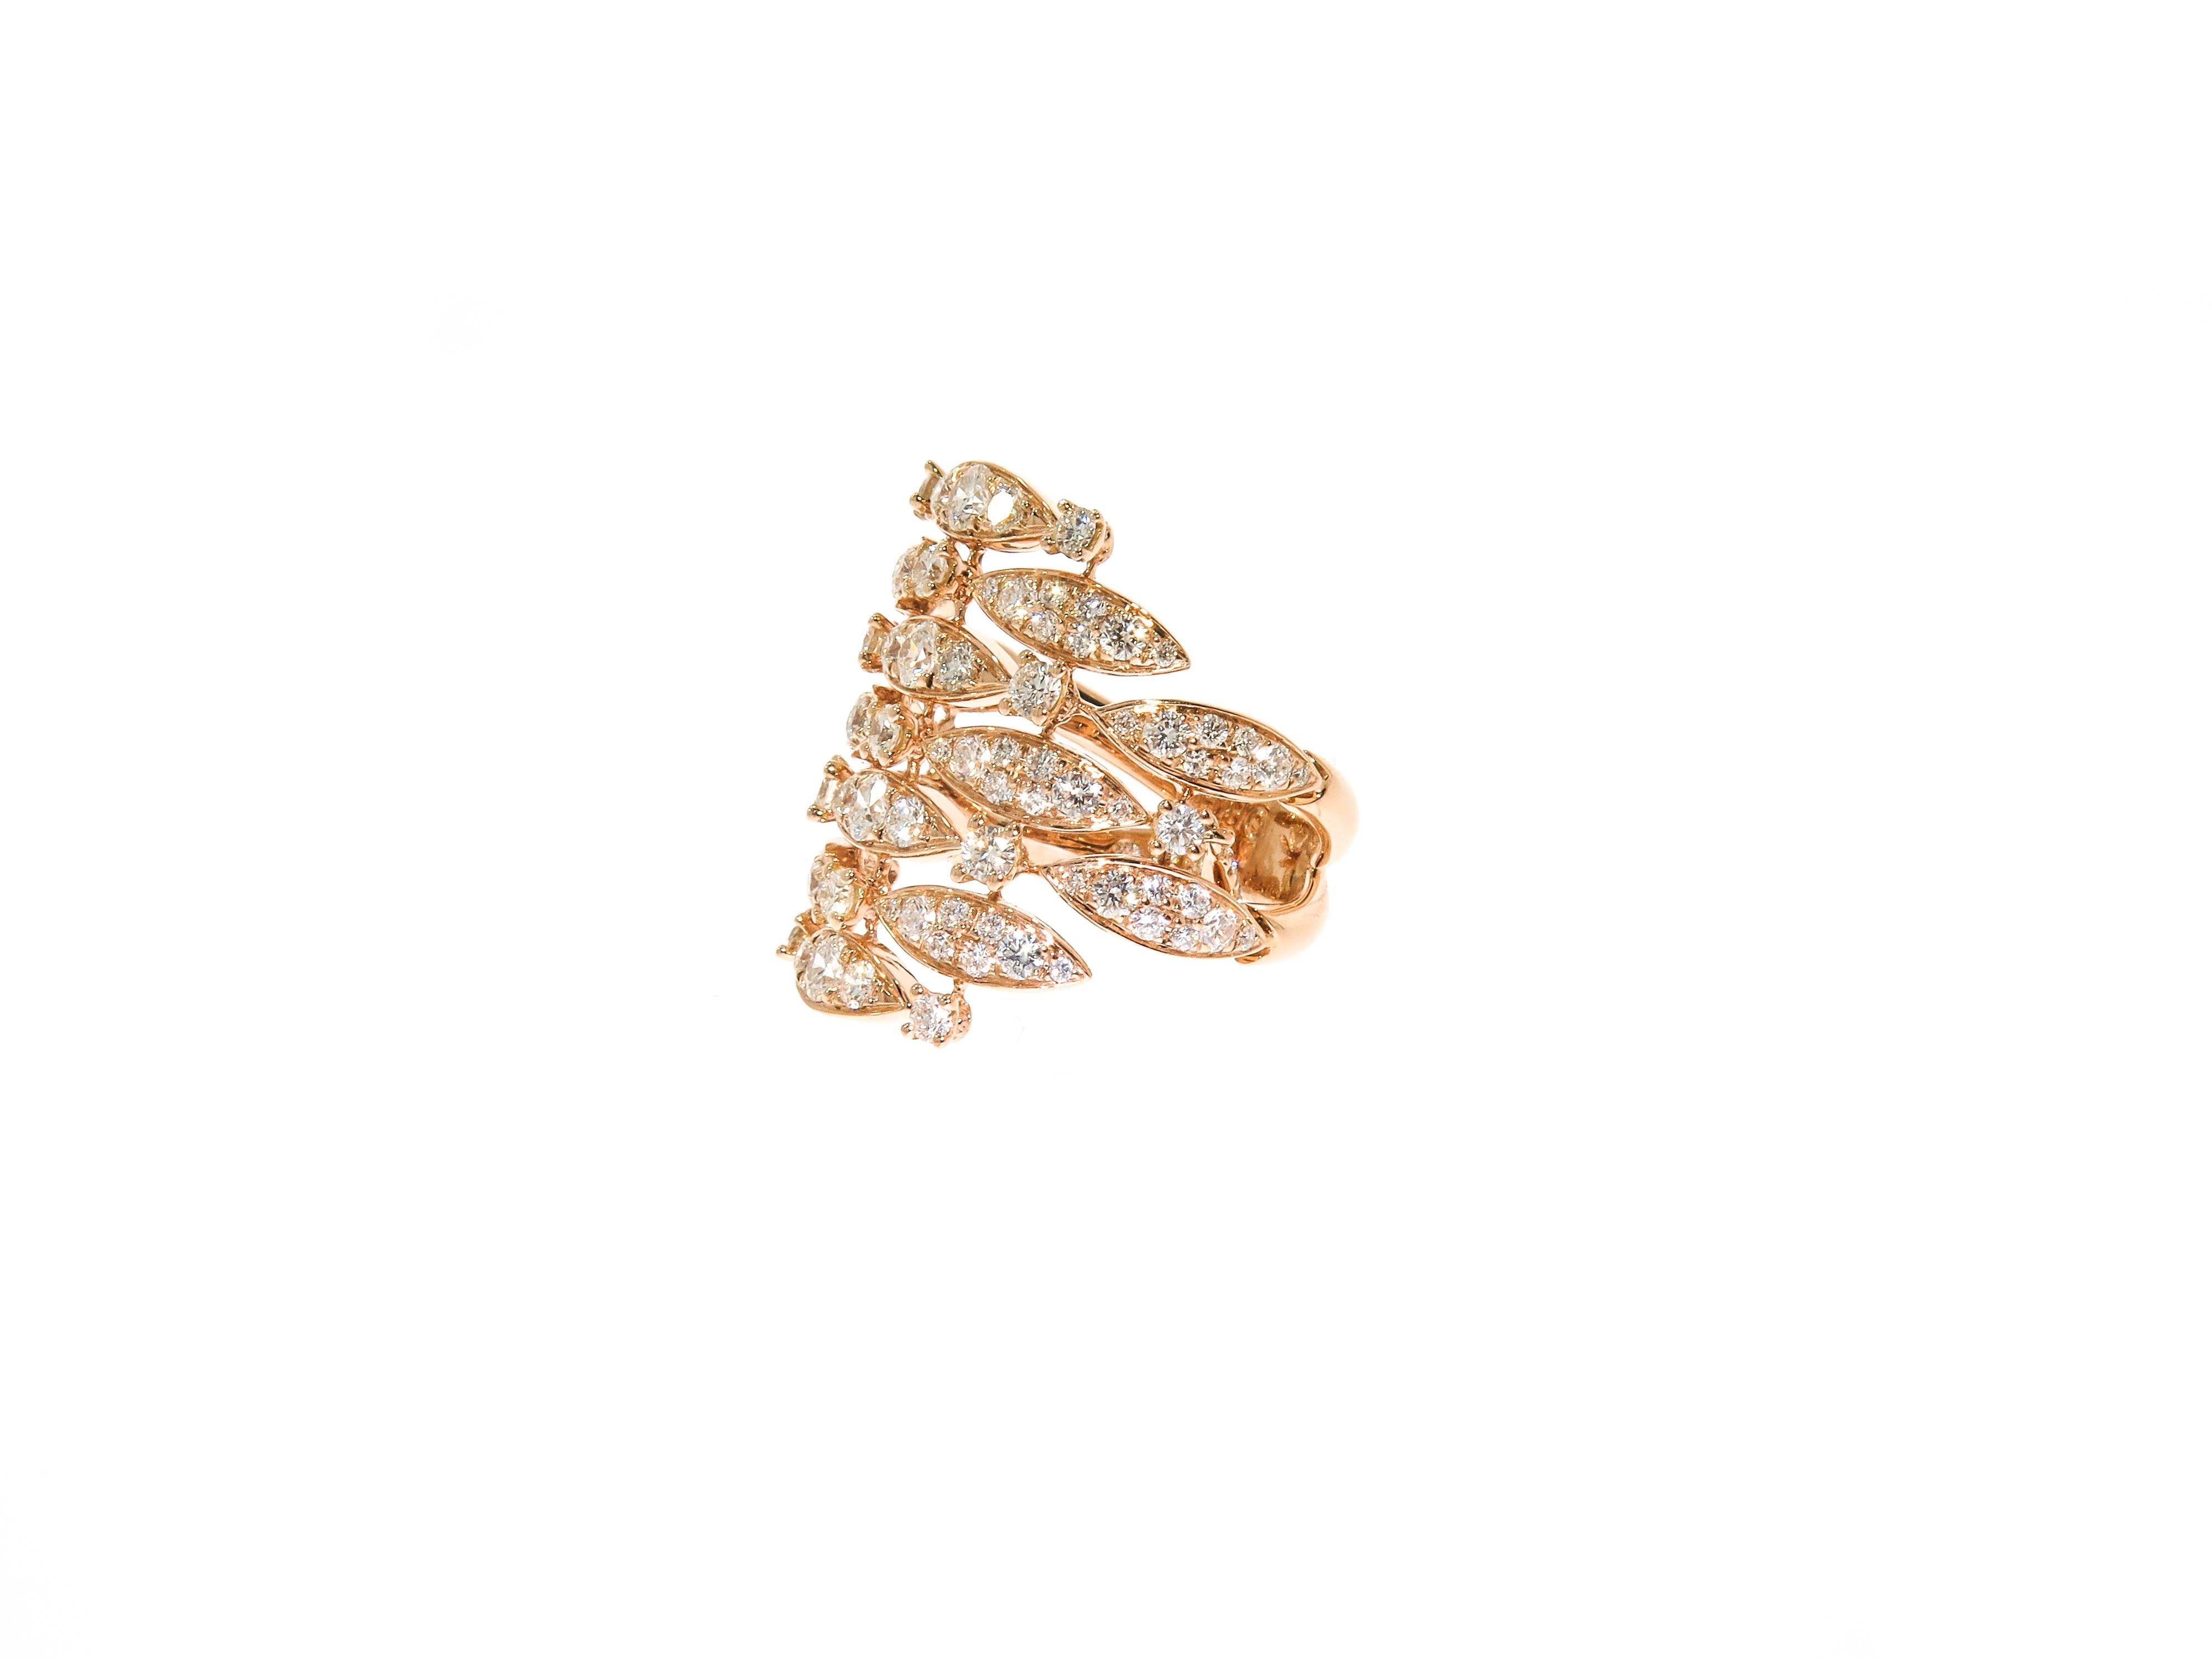 Modern Rose Gold Diamond Cocktail Ring by Casato